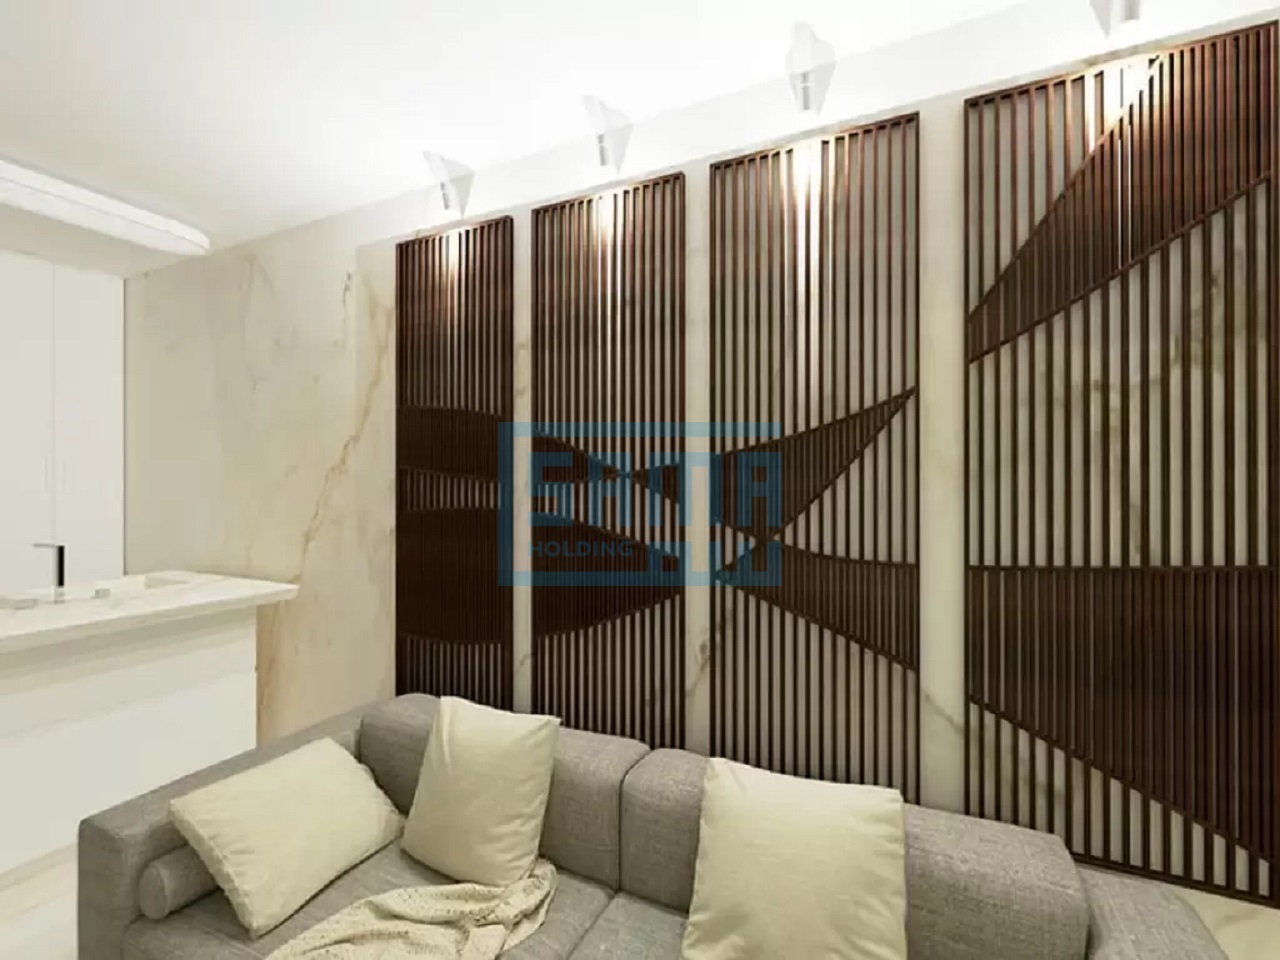 Flat for Sale in Abu Dhabi in Al Raha Beach: Furnished Apartment Under Construction